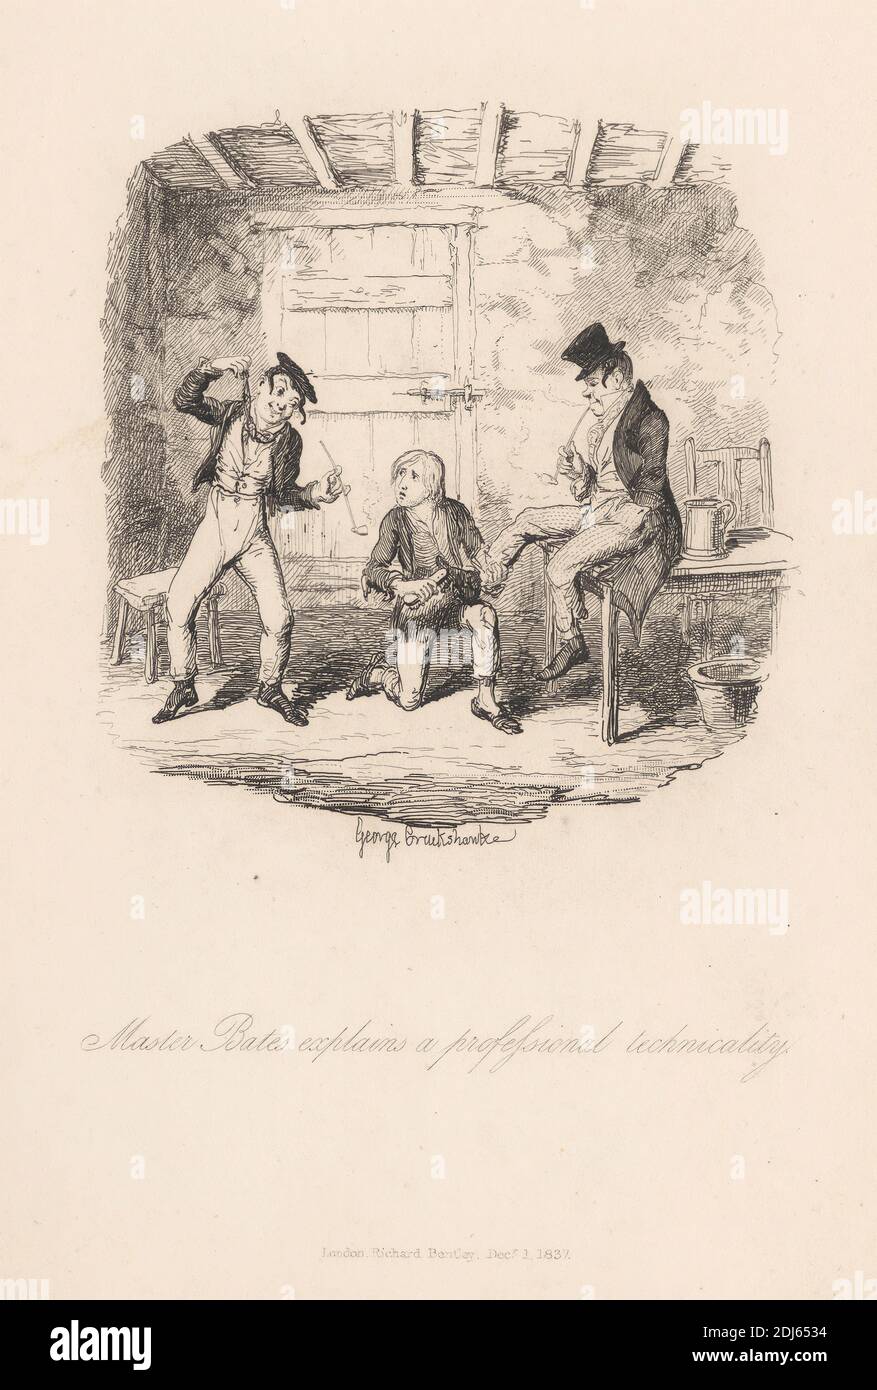 Master Bates Explains a Professional Technicality, Print made by George Cruikshank, 1792–1878, British, 1837, Etching on medium, slightly textured, cream wove paper Stock Photo